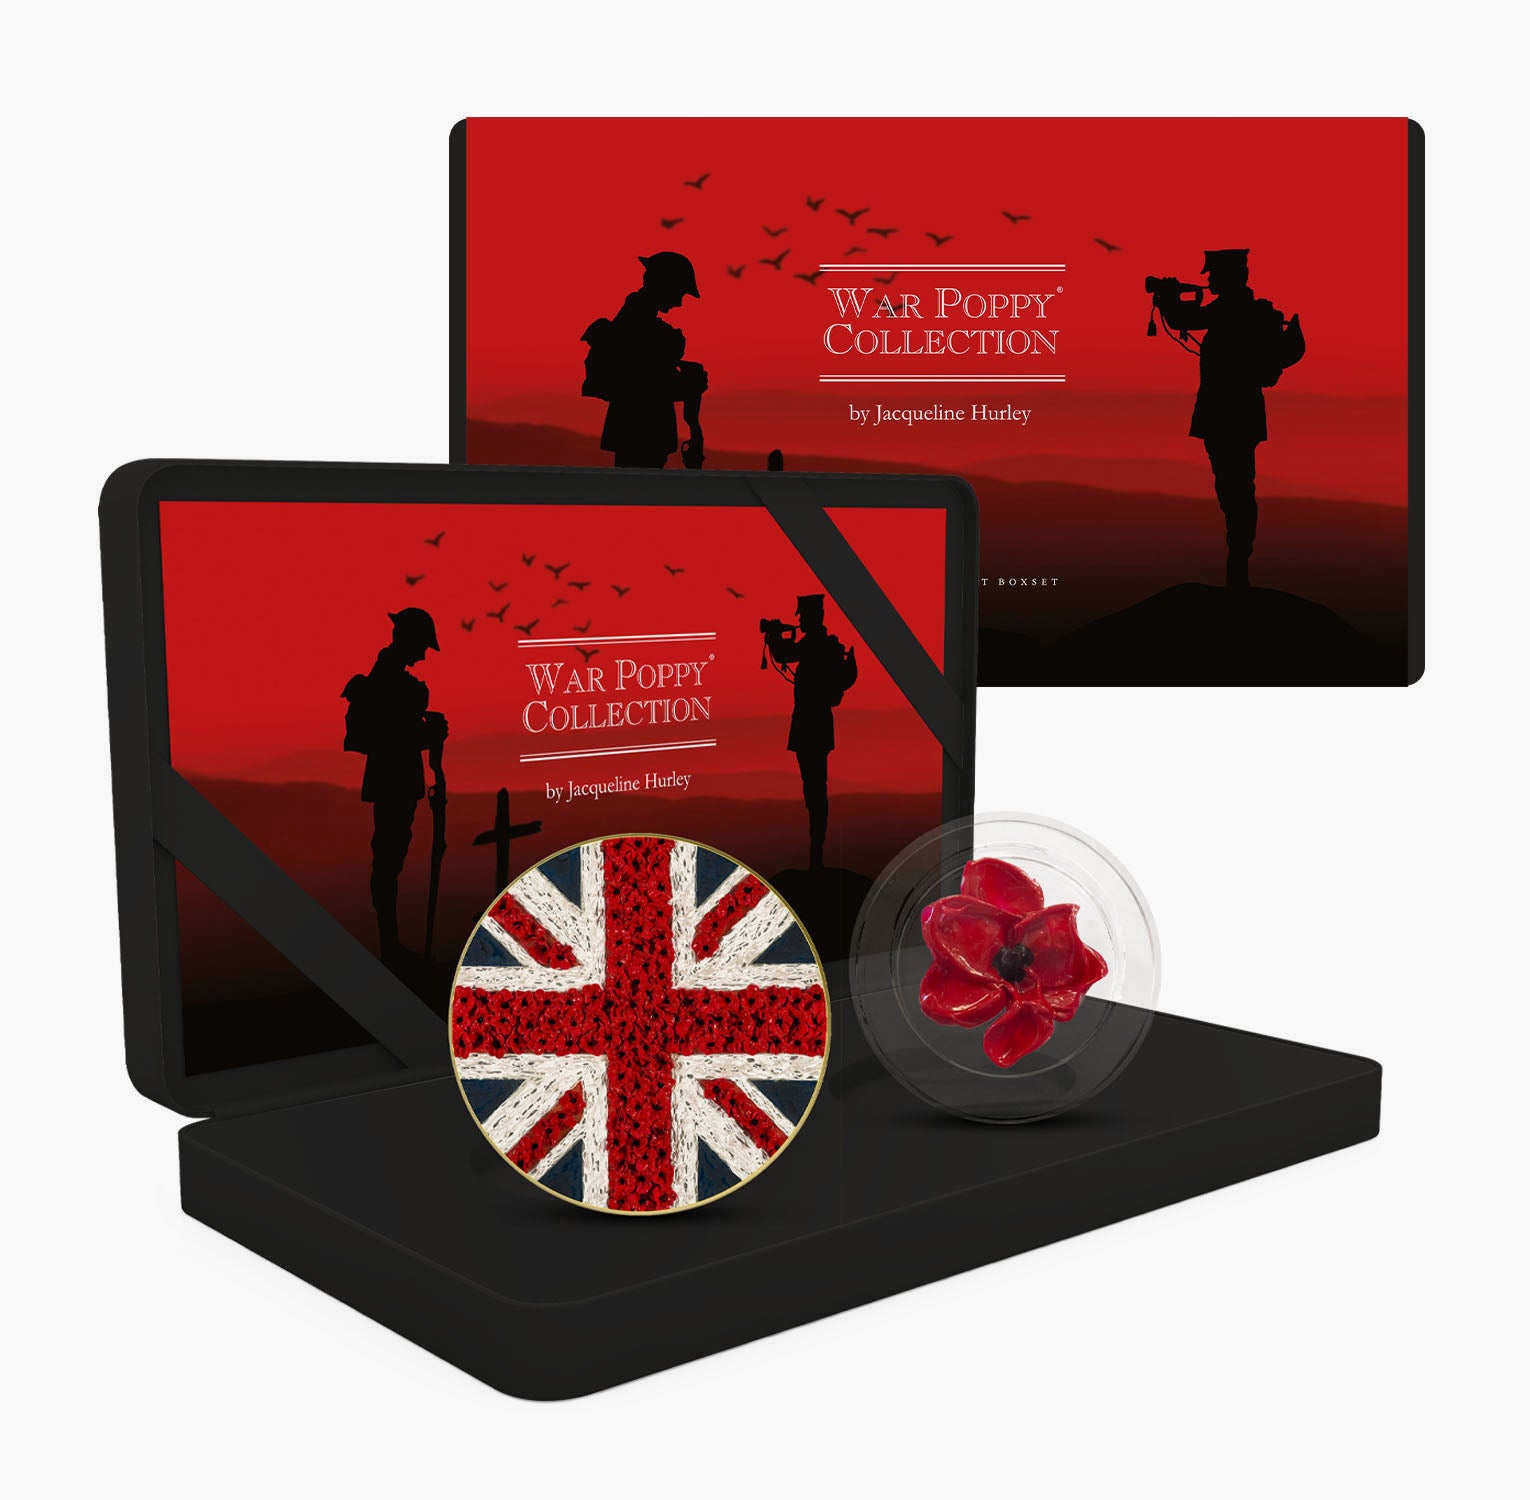 The Jacqueline Hurley War Poppy a Time to Reflect Box Set